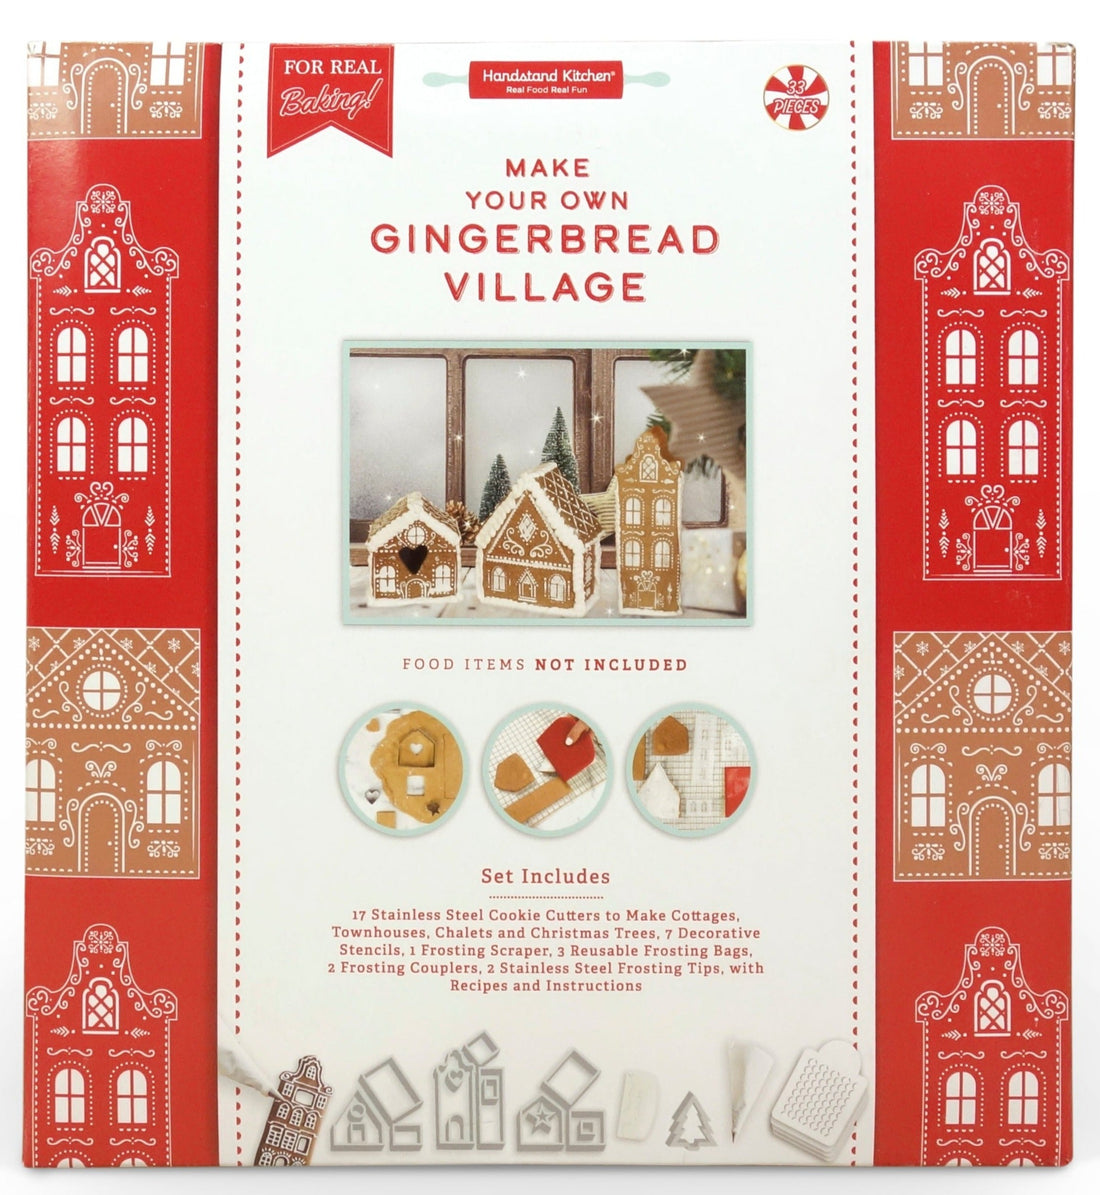 In box image of Make Your Own Gingerbread Village including: 17 Stainless Steel Cookie Cutters to Make  Cottages, Townhouses, Chalets and Gingerbread Men,  7 Decorative Stencils, 1 Frosting Scraper, 2 Reusable  Frosting Bags, 2 Frosting Couplers with Rings and 2  Stainless Steel Frosting Tips, along with Recipes and Instructions